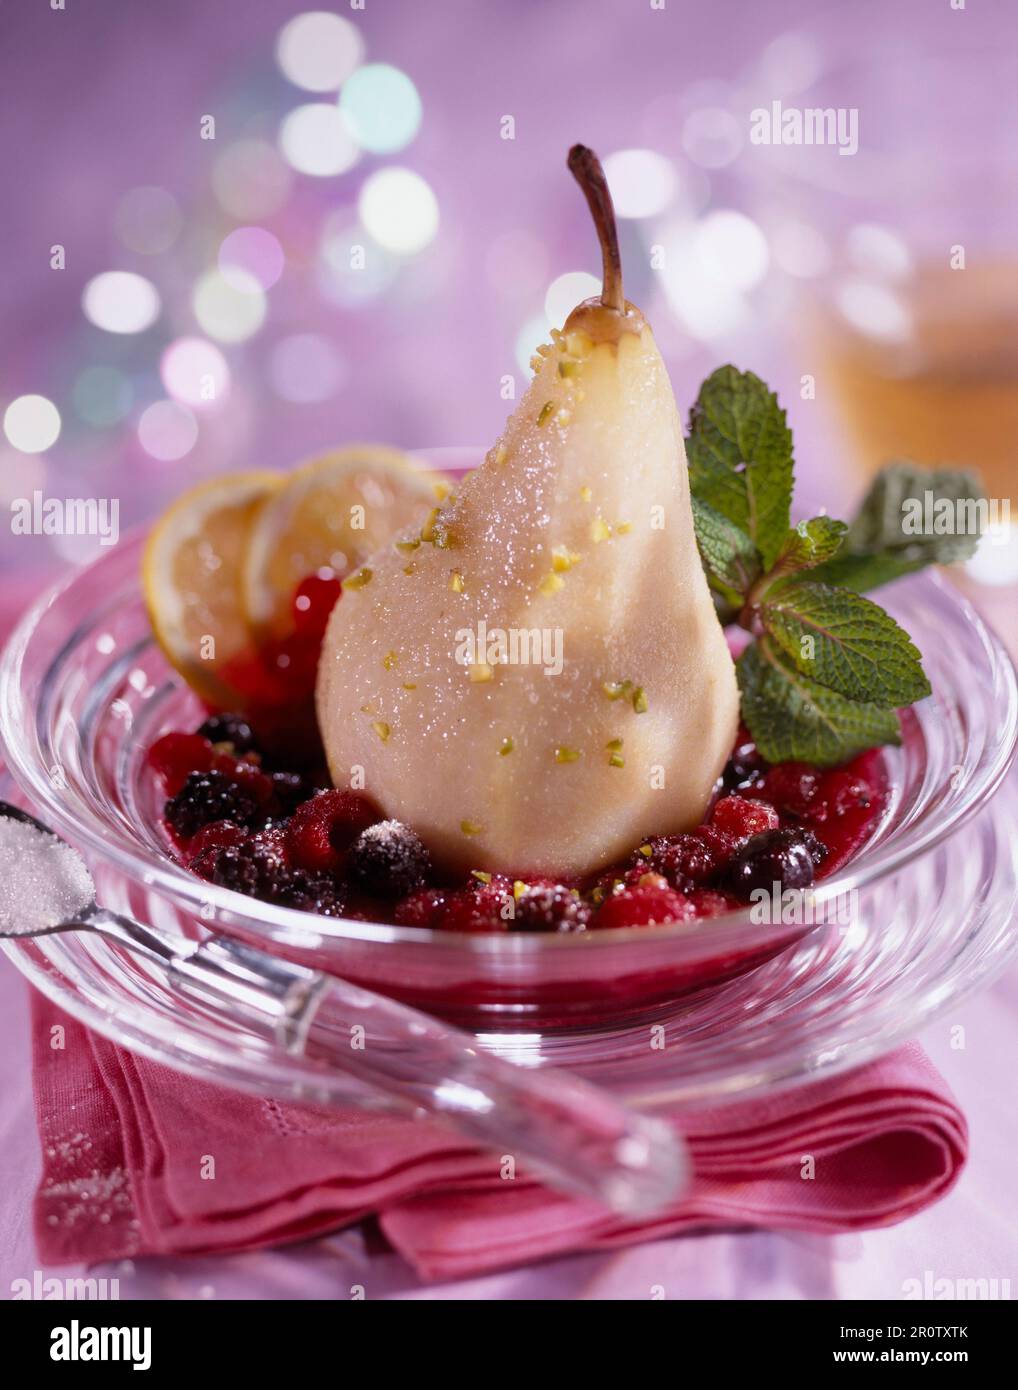 Pear and summer fruit chaudfroid Stock Photo